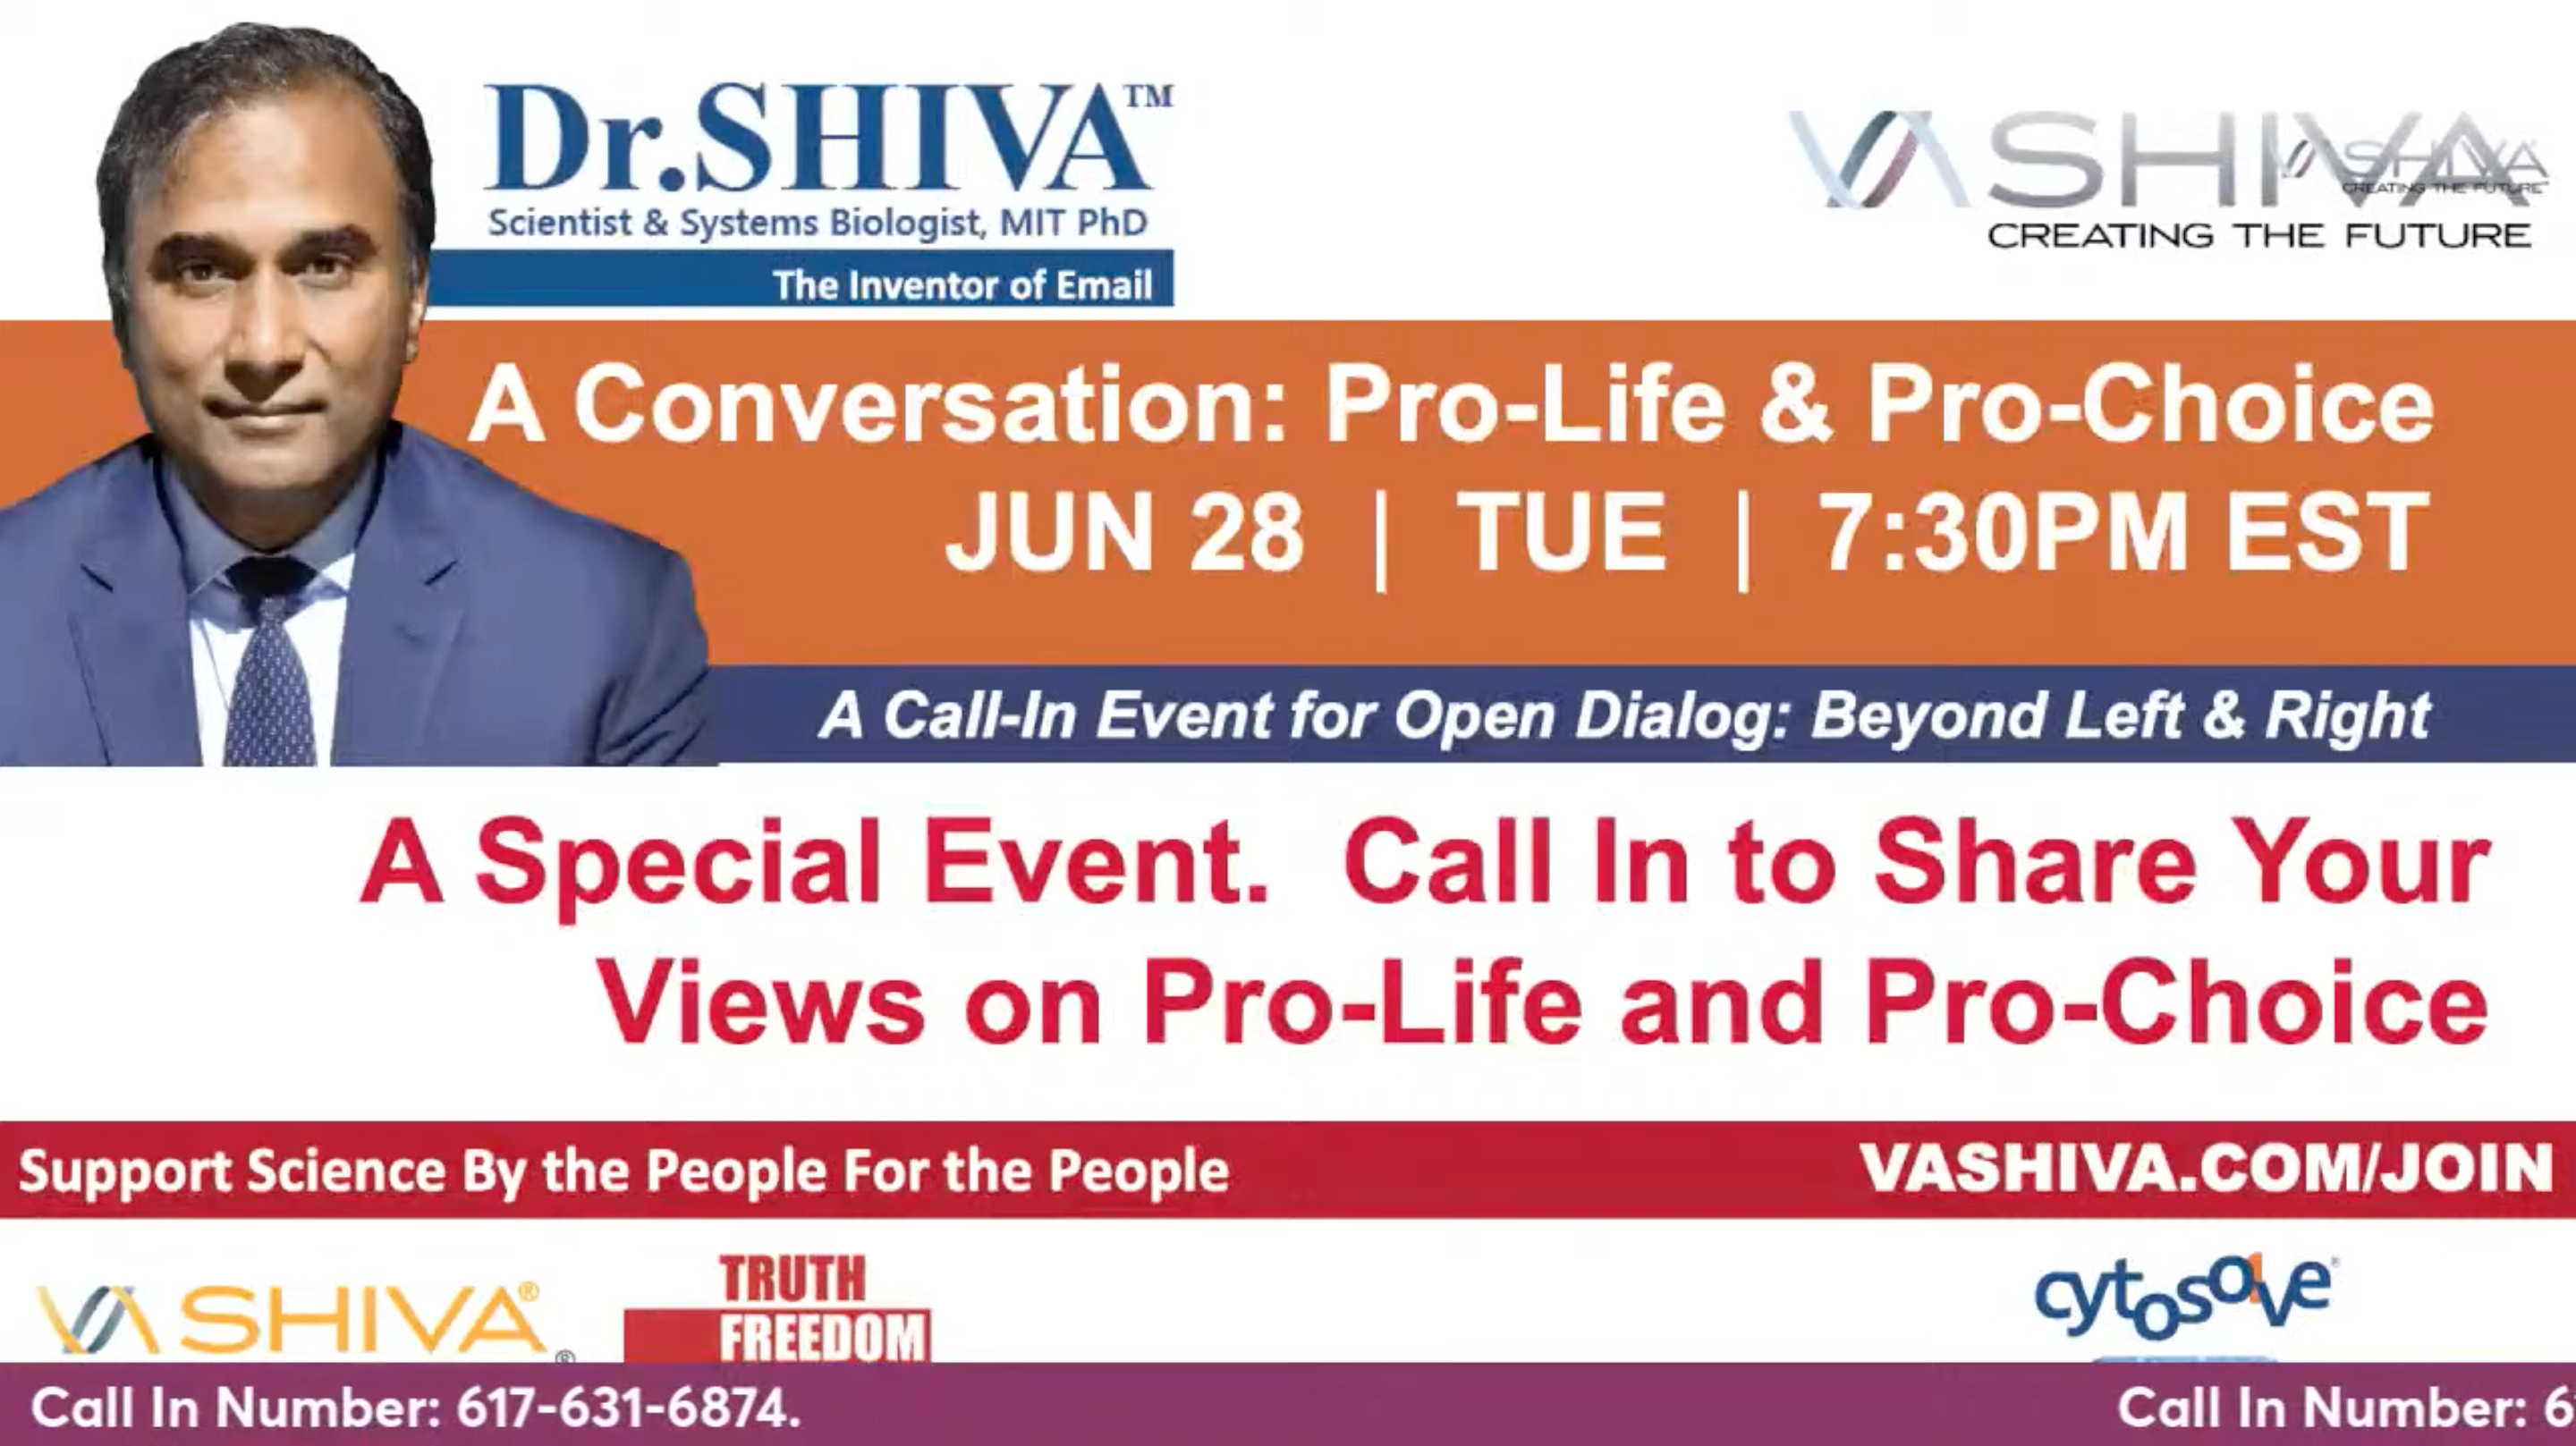 Dr.SHIVA LIVE: A Conversation: Pro-Life & Pro-Choice. Call-In Show for Public Dialog - Beyond Left & Right.